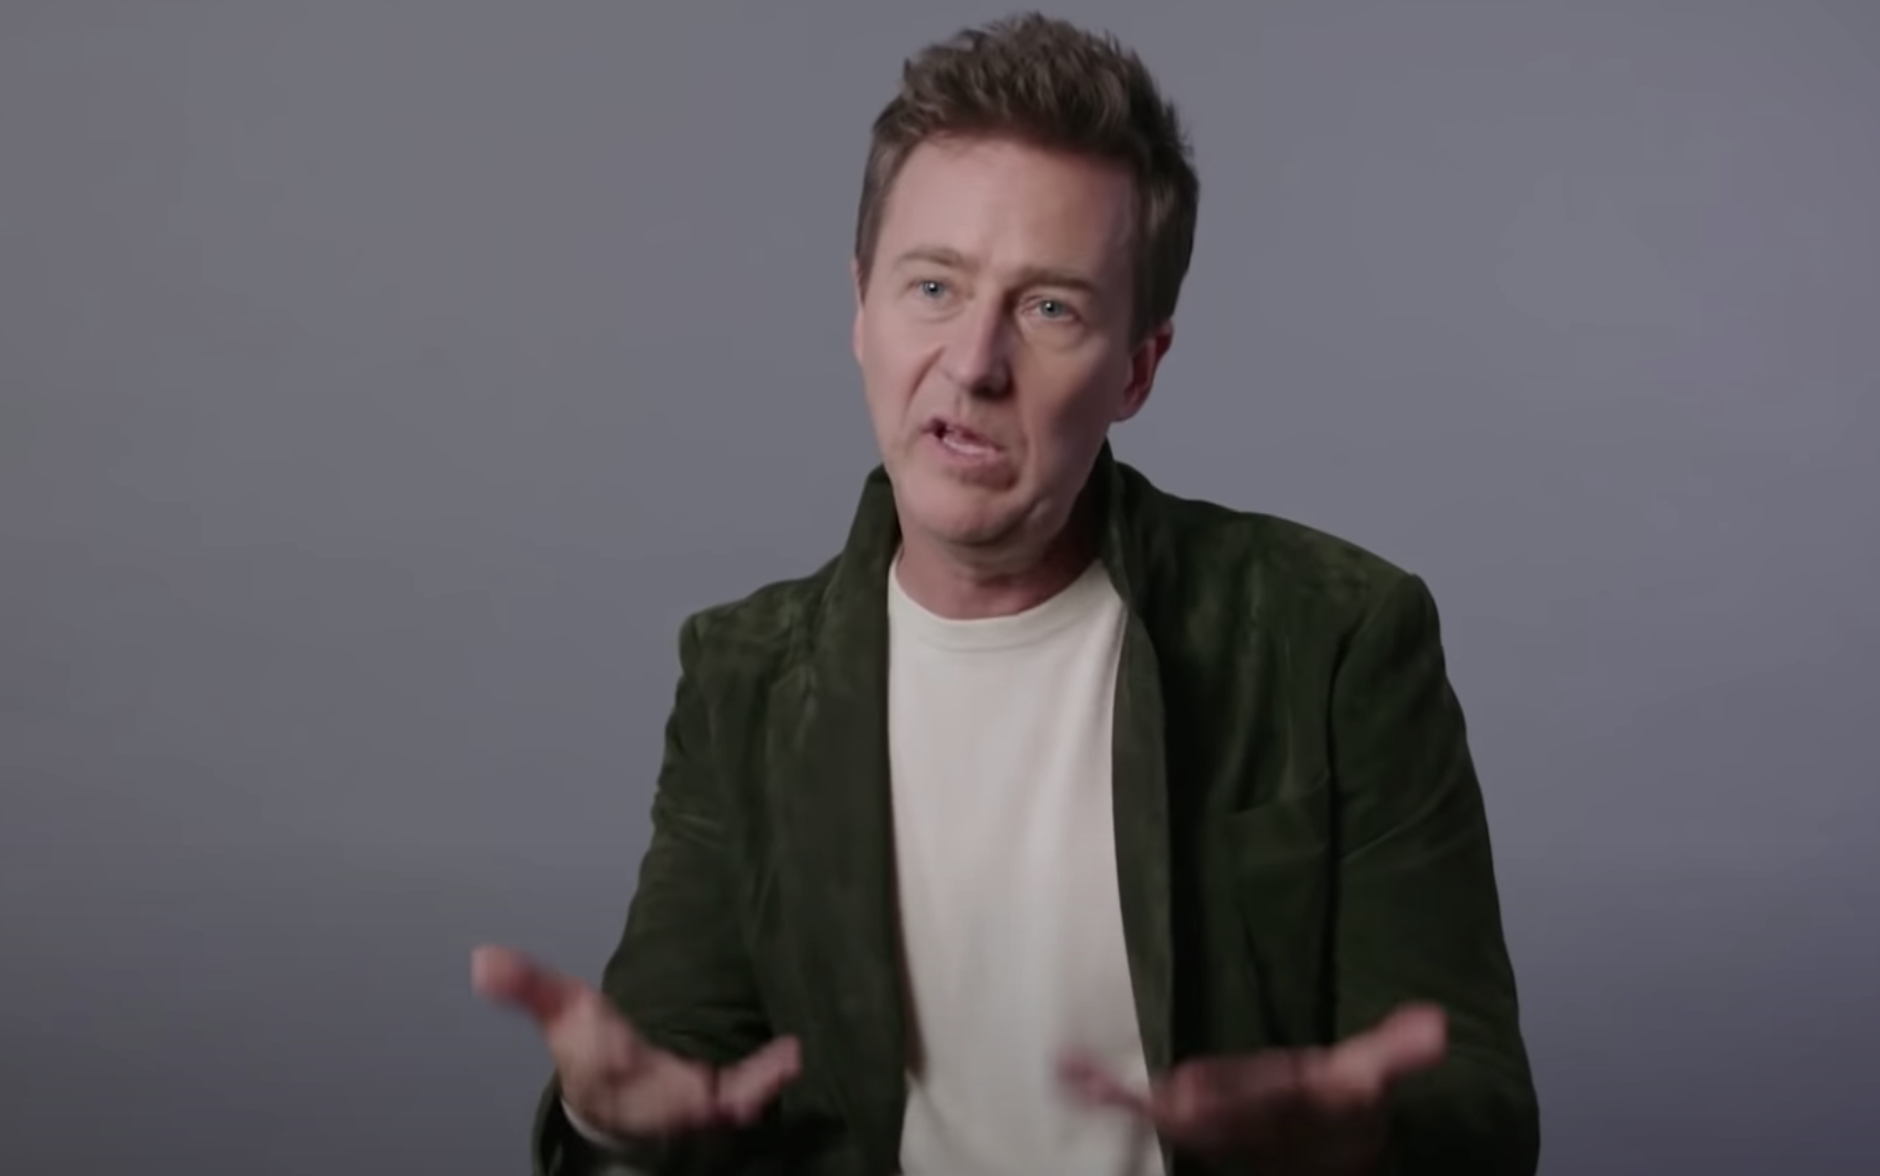 Ed Norton Says ‘Whiny,' 'Petulant' Trump Refusing to Concede to Avoid ‘Jail Time’